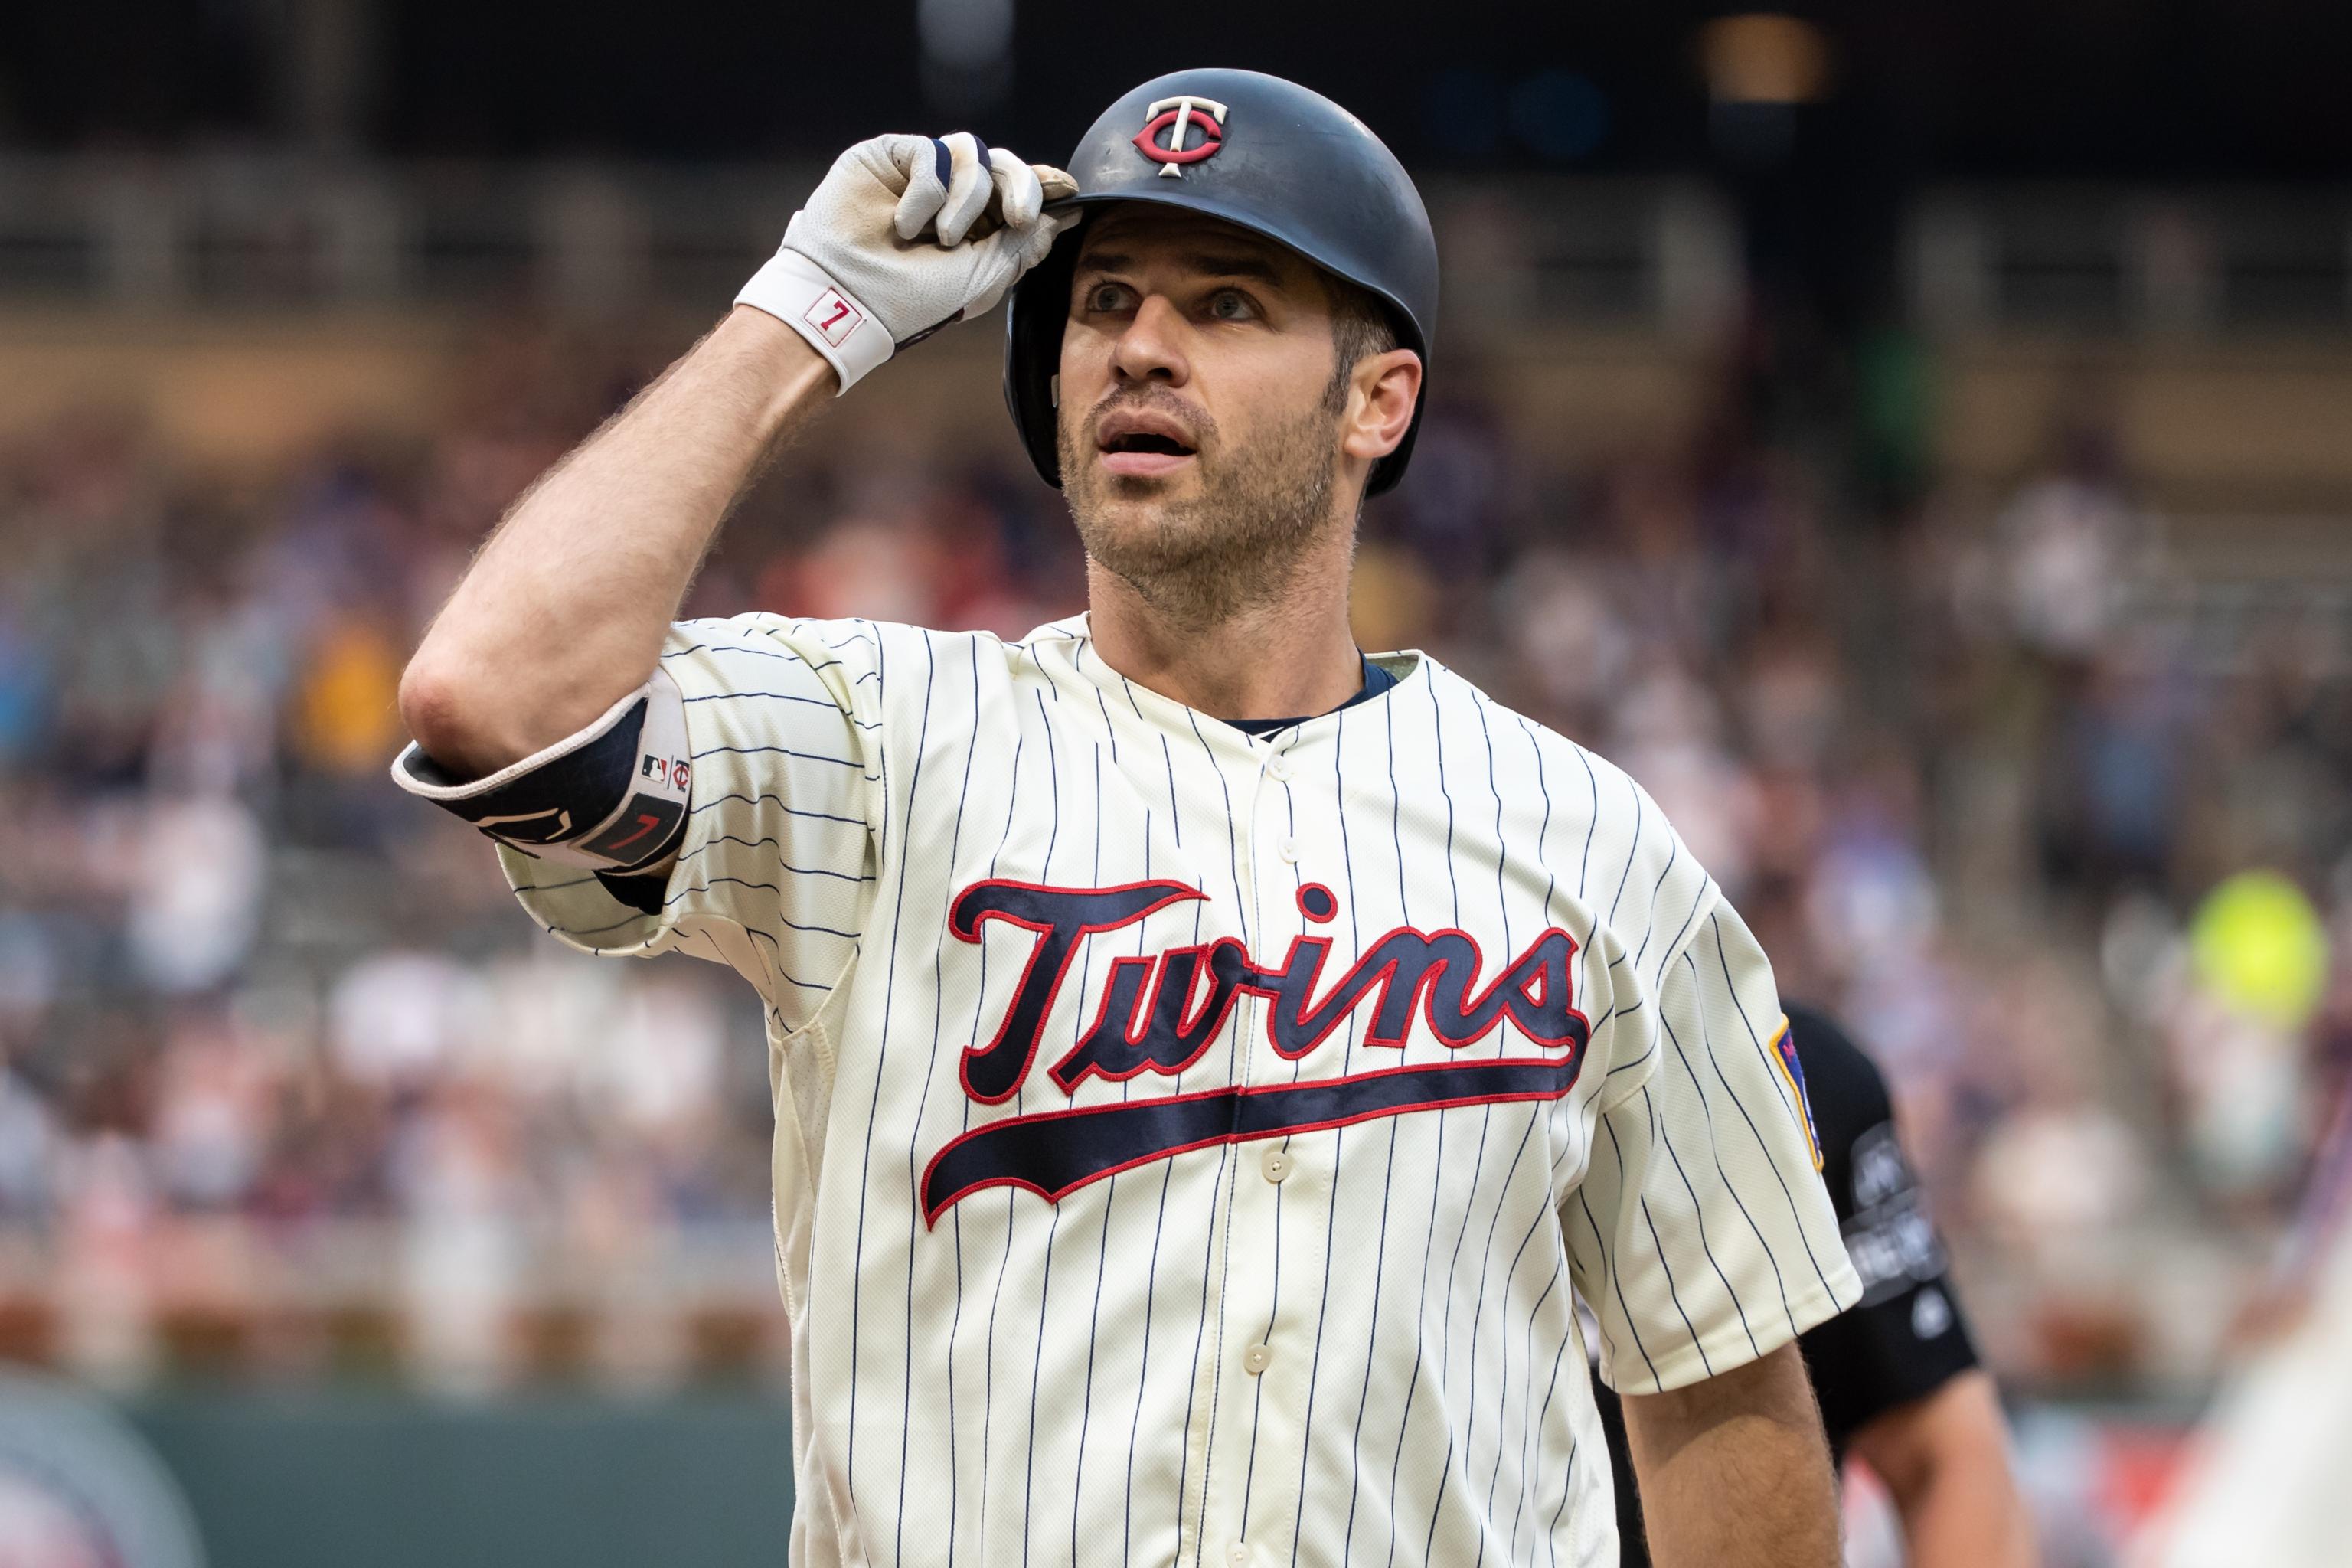 Joe Mauer to Announce MLB Retirement After 15 Seasons with Twins